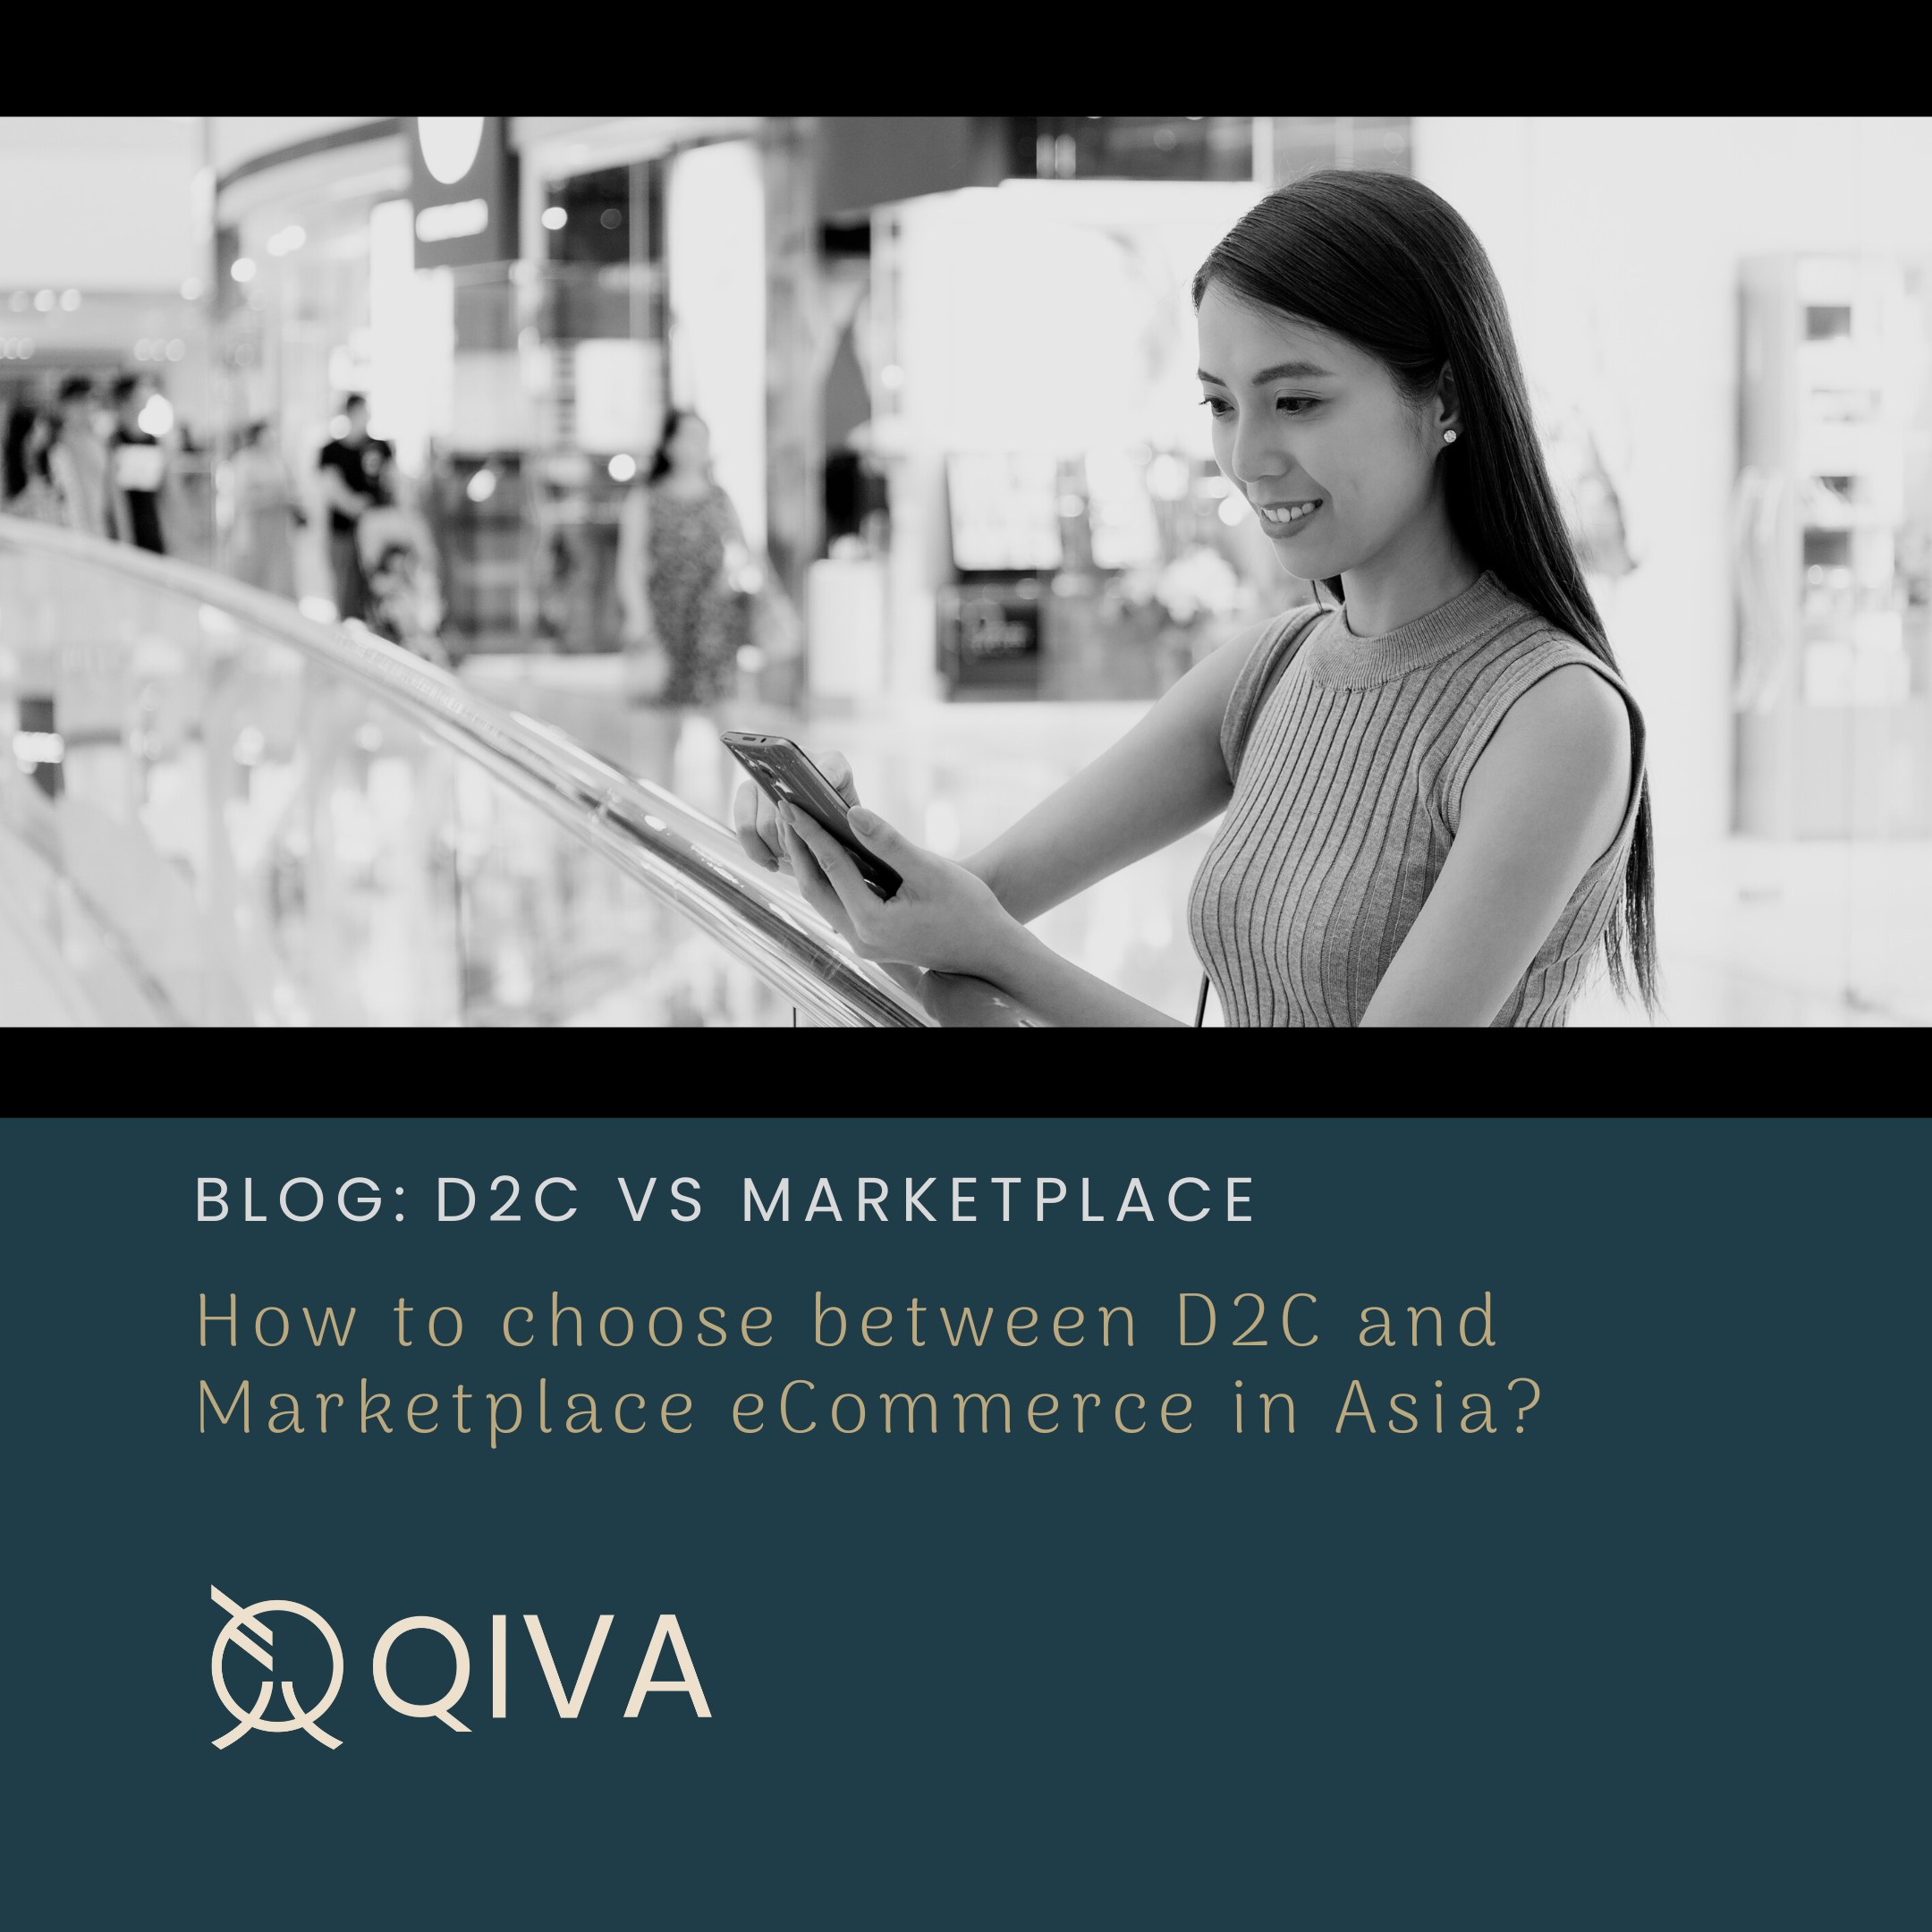 How to choose between D2C and Marketplace eCommerce in Asia? 